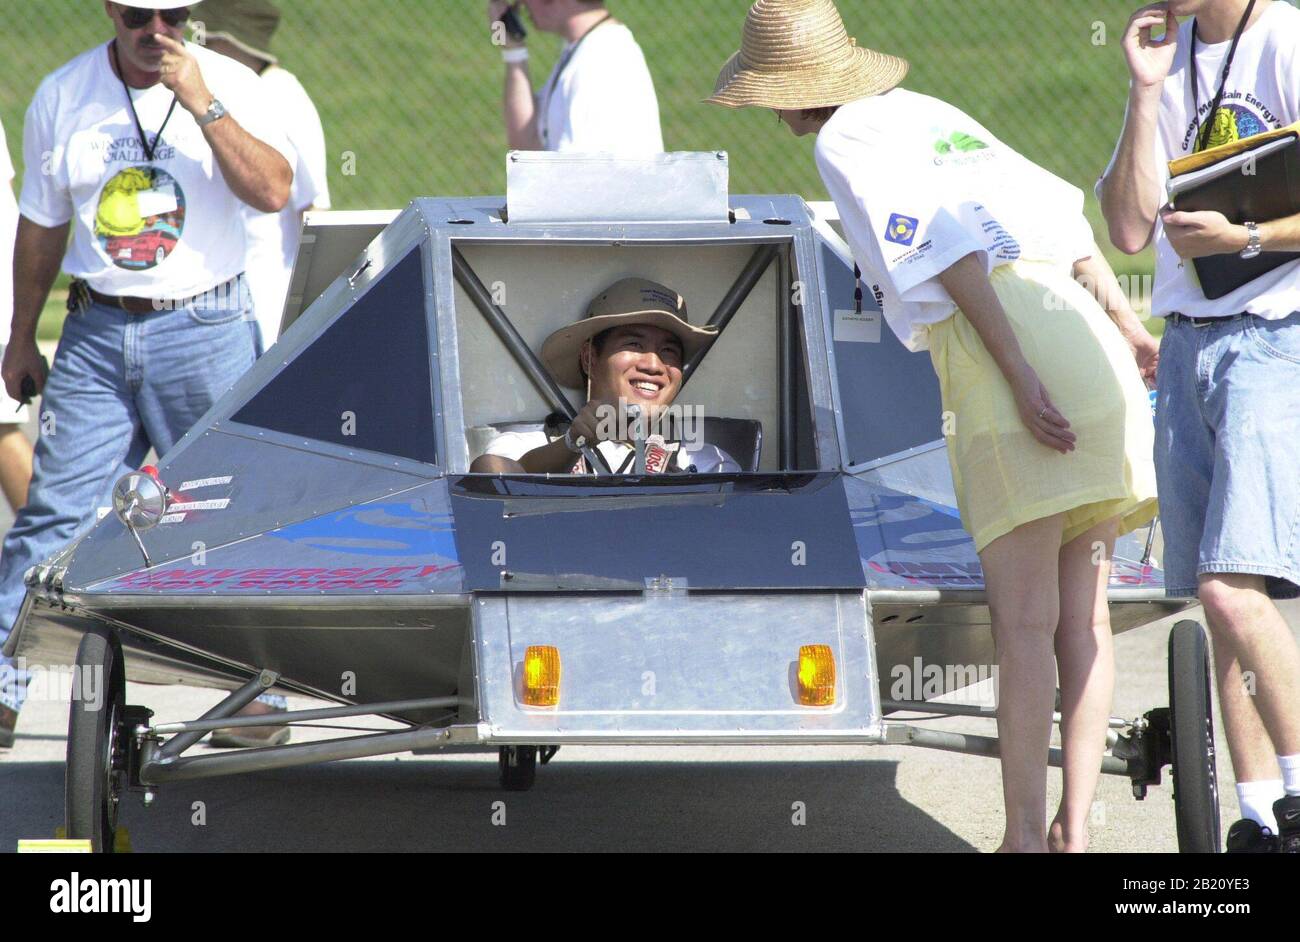 July 16, 2001, Round Rock, Texas: Solar car designed and built by high school students from Irvine, CA, prepares for the start the Winston Solar Challenge race at the Dell Computer headquarters north of Austin. The nine-day event ends in Columbus, Indiana and features teams from Texas, Mississippi, California, Indiana, South Carolina, Puerto Rico and Mexico. ©Bob Daemmrich Stock Photo